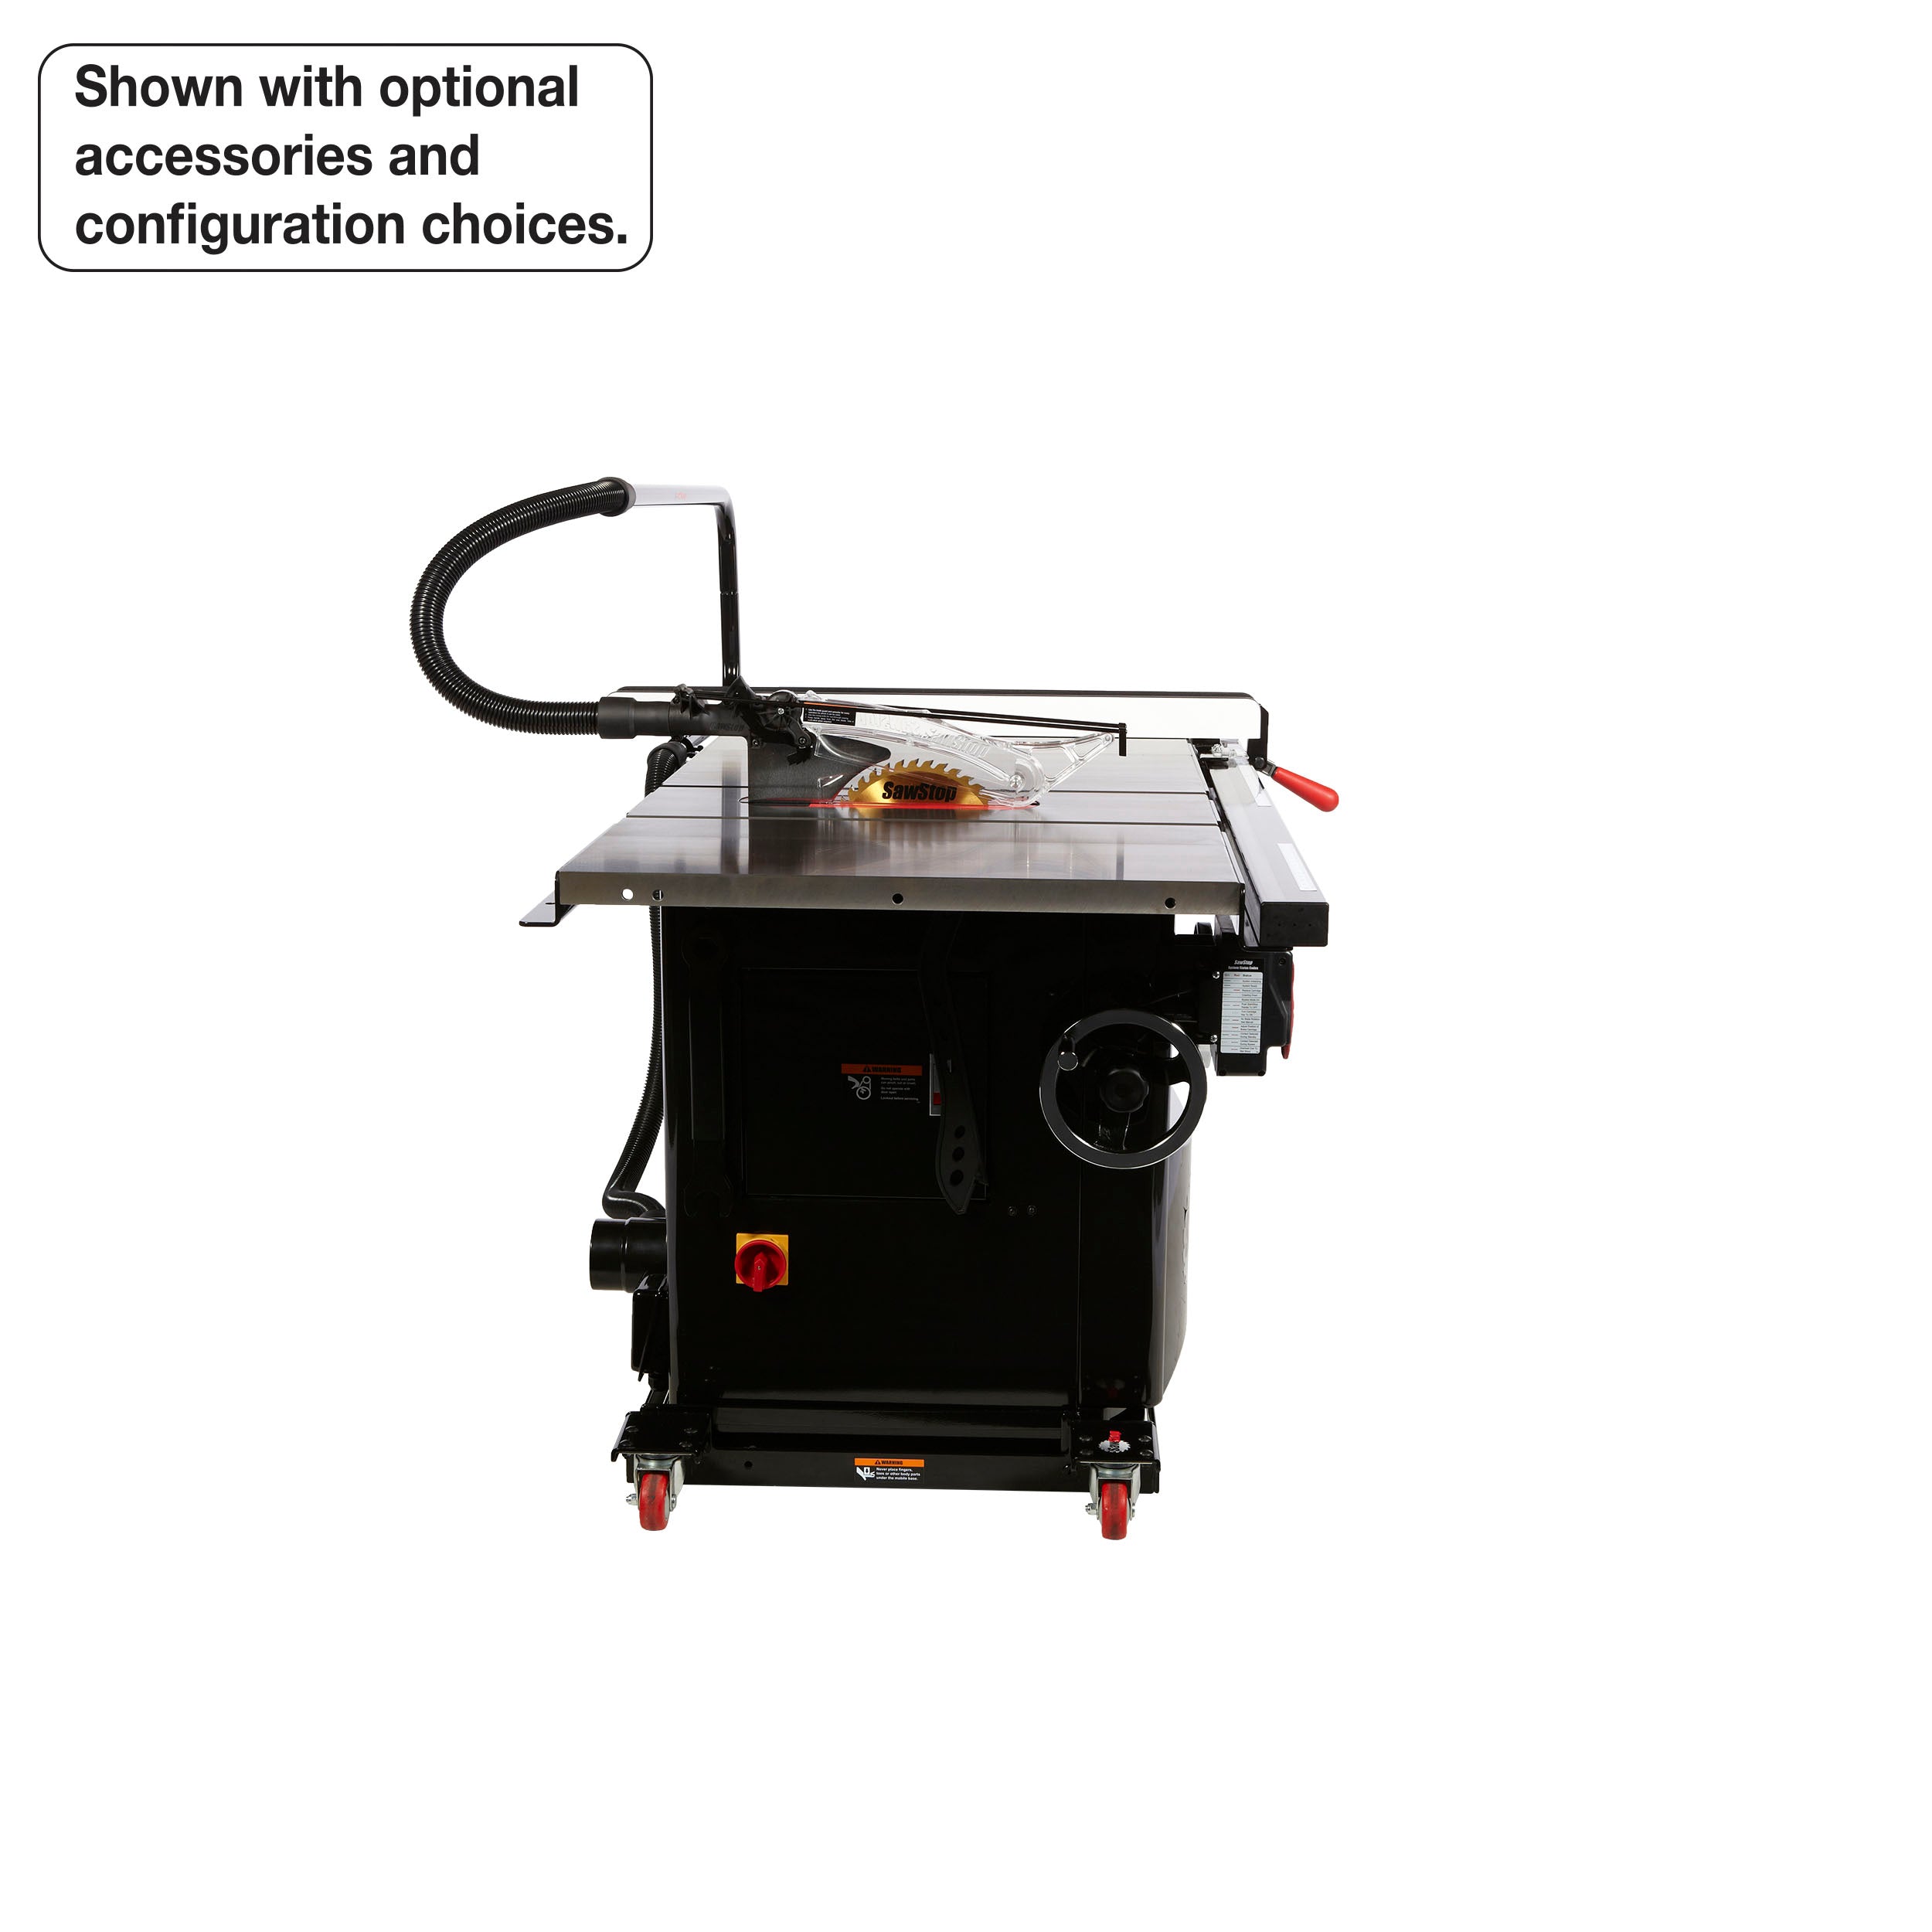 SawStop 3HP, 1ph, 230v Industrial Cabinet Saw w/ 52